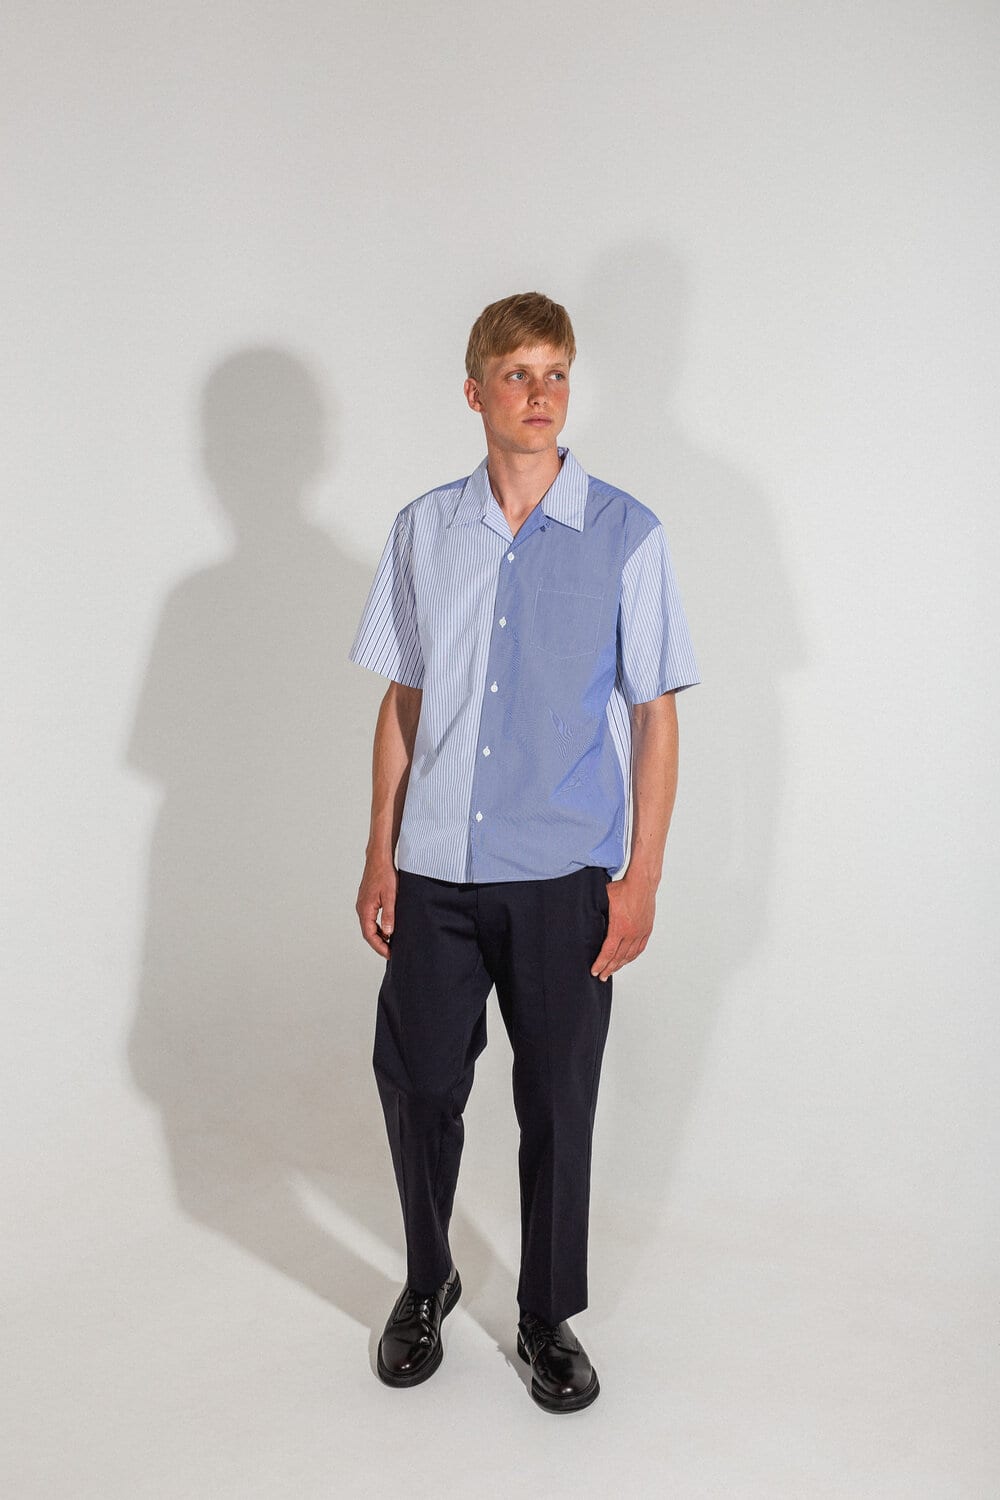 lookbook norse projects sp20 Premium Function 7